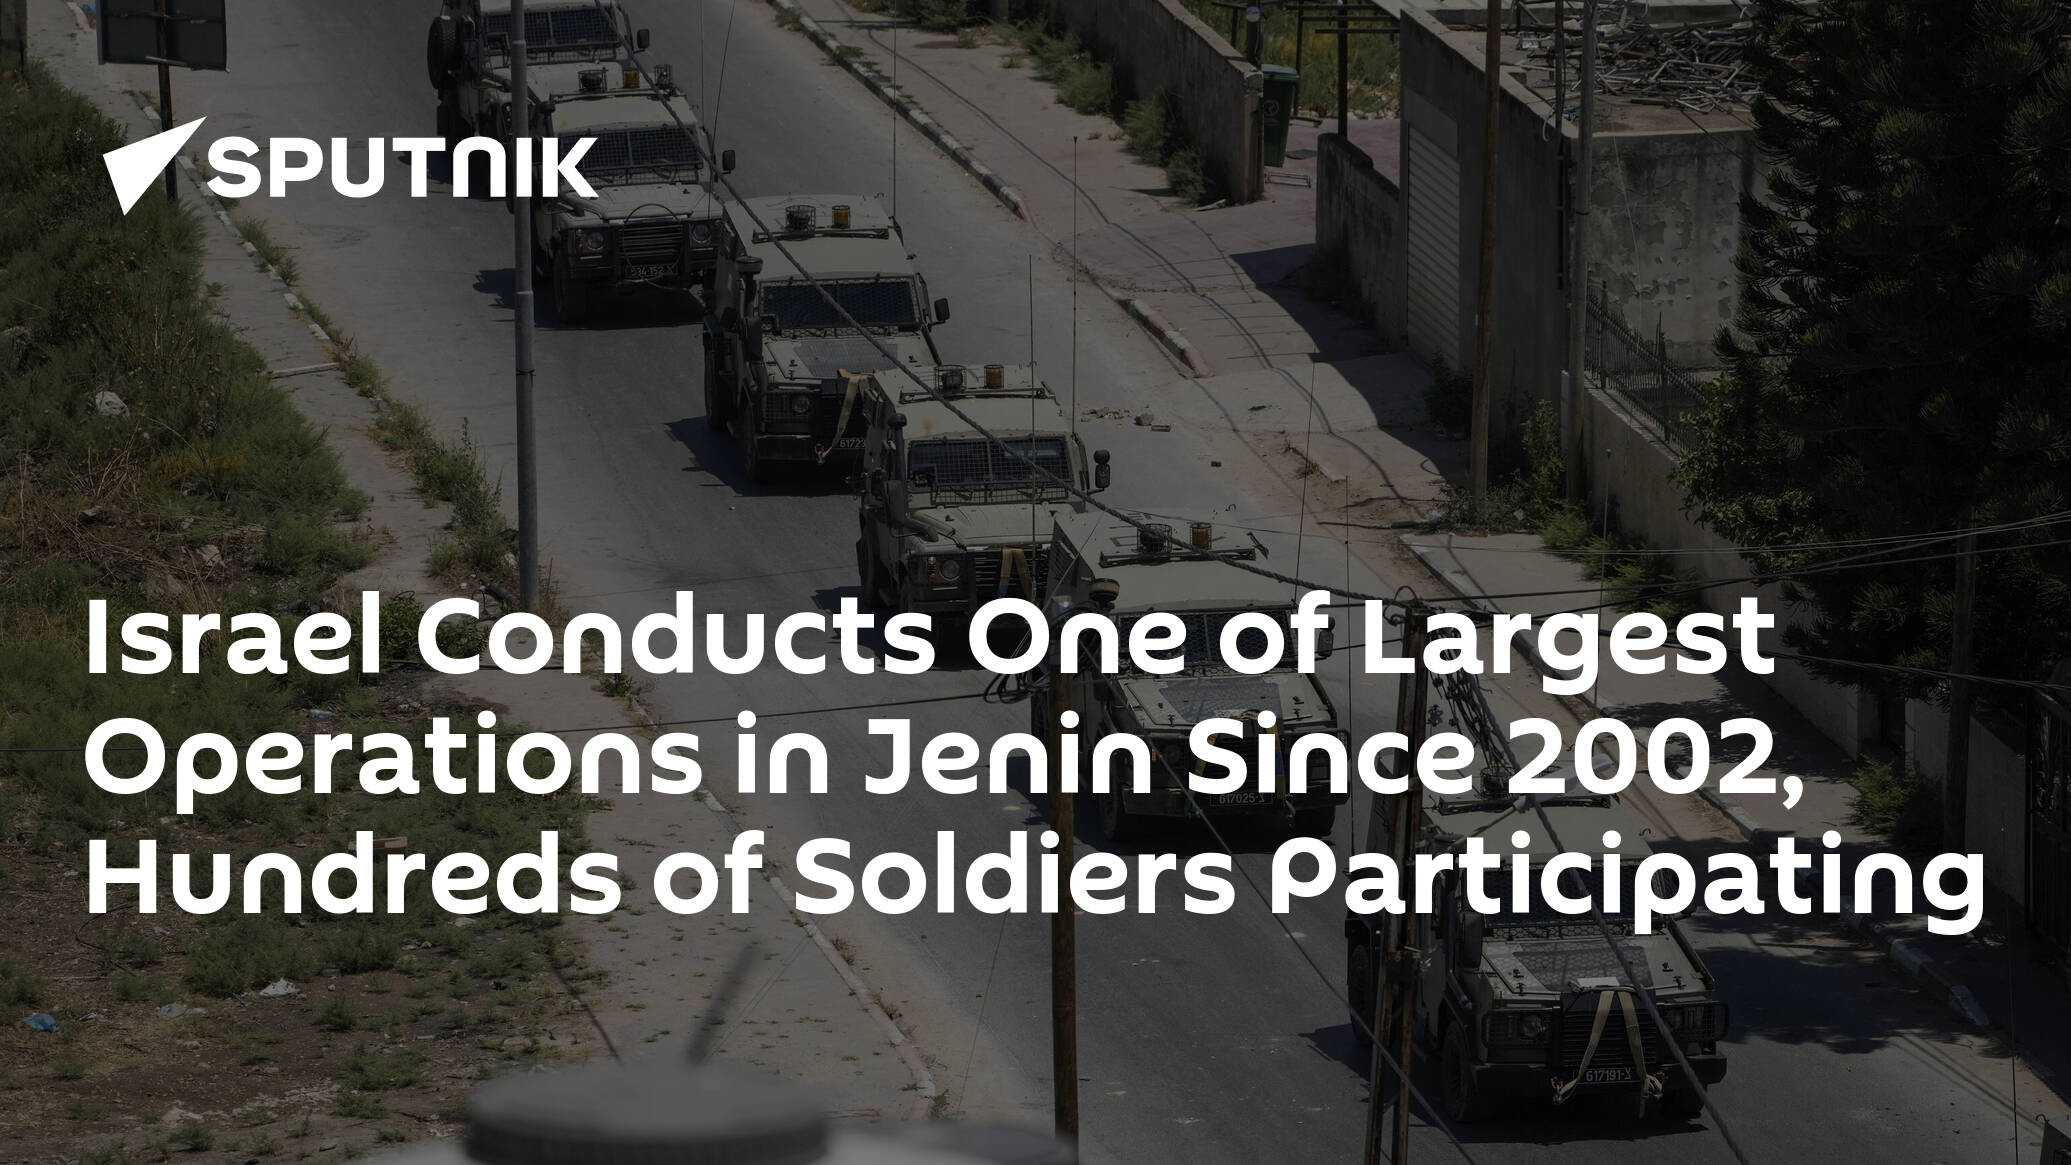 Israel Conducts One of Largest Operations in Jenin Since 2002, Hundreds of Soldiers Participating